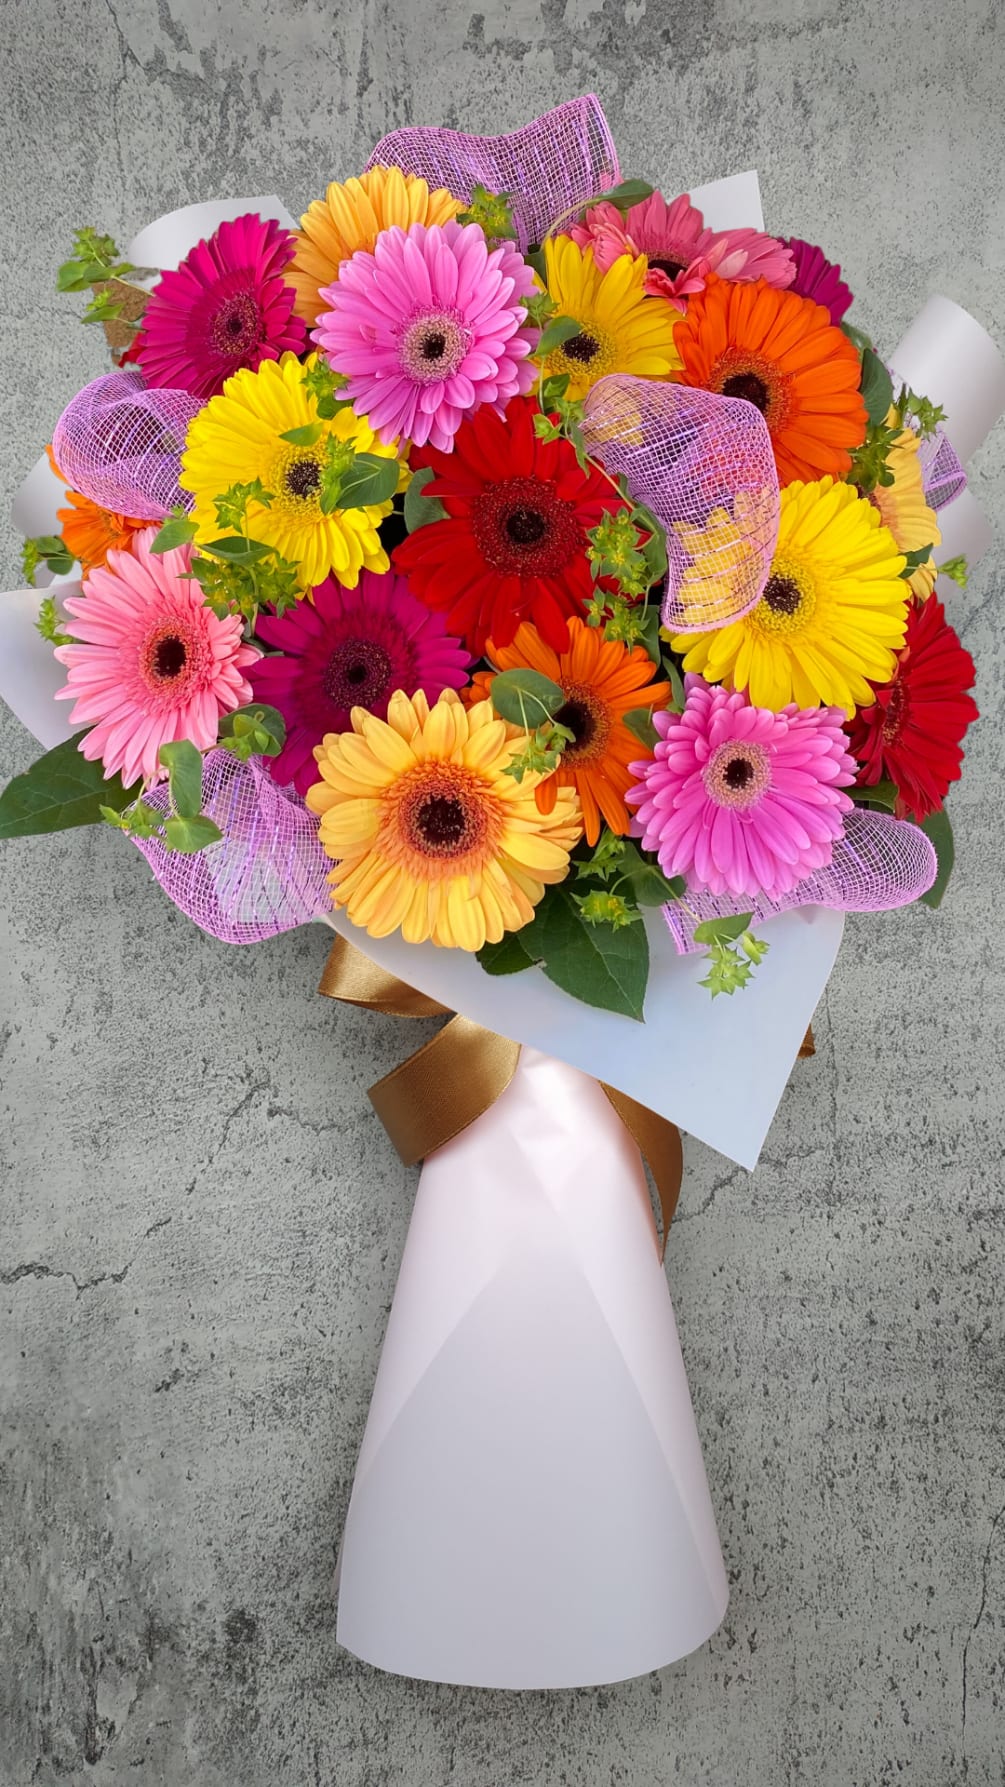 Beautiful Colorful Hand Tied Bouquet With Assorted Gerber Daisies. Symbolic Of Joy